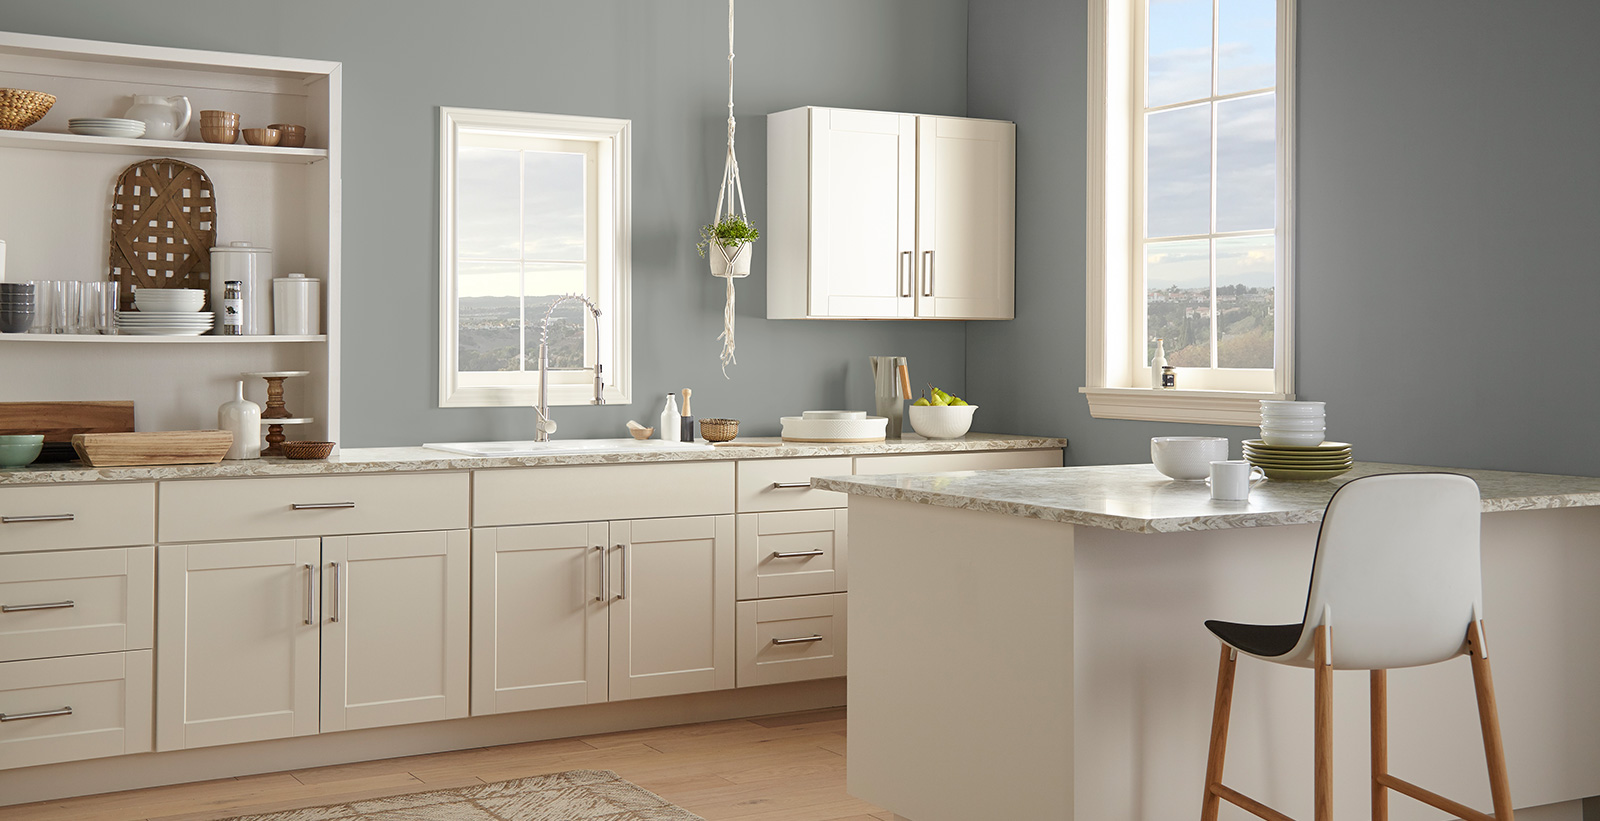 Paint Colors Behr, What Is The Best Behr Paint For Kitchen Cabinets